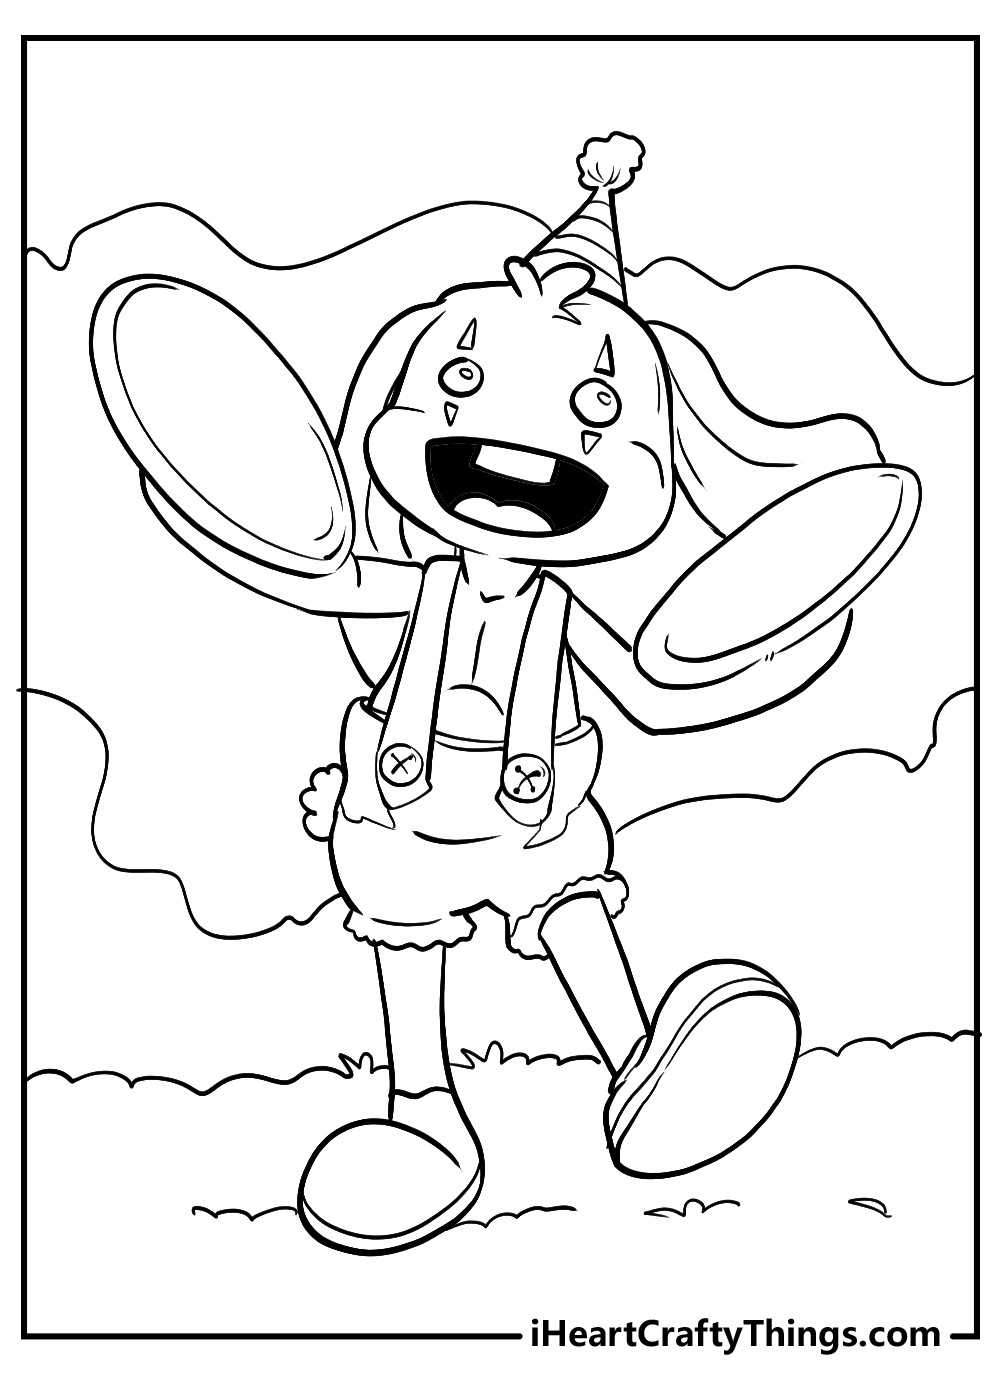 Bunzo Bunny coloring pages